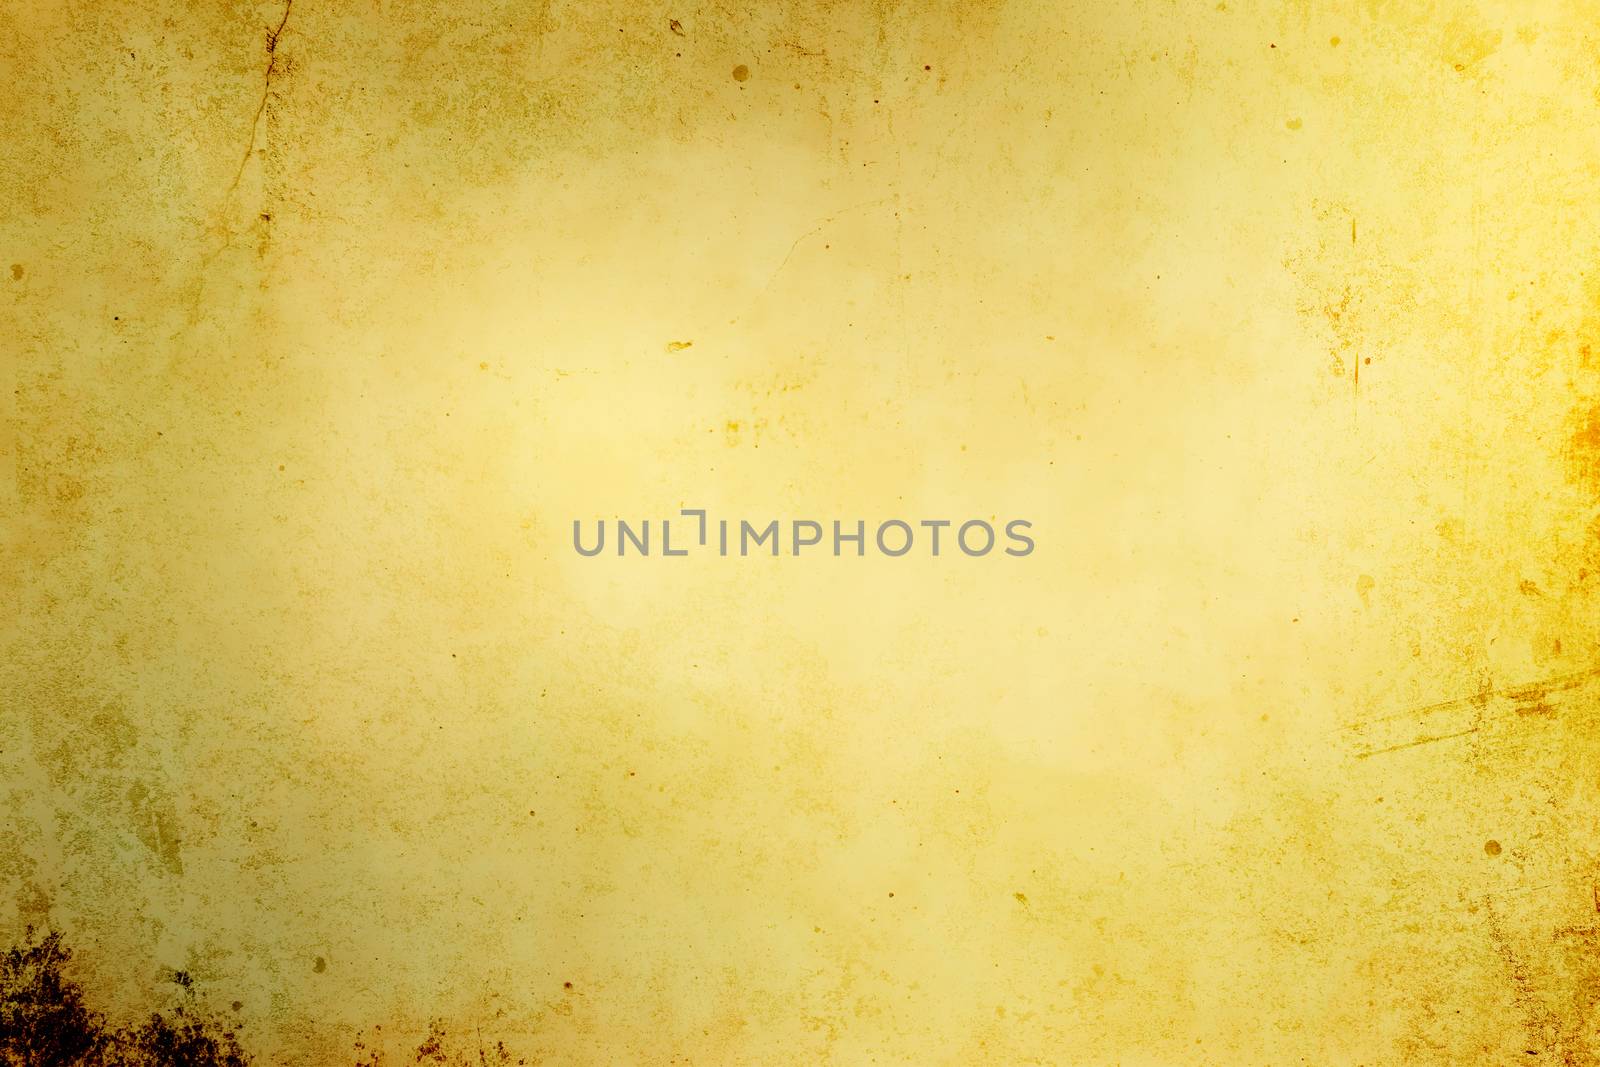 Gold gradient abstract background with soft glowing backdrop, background texture for design